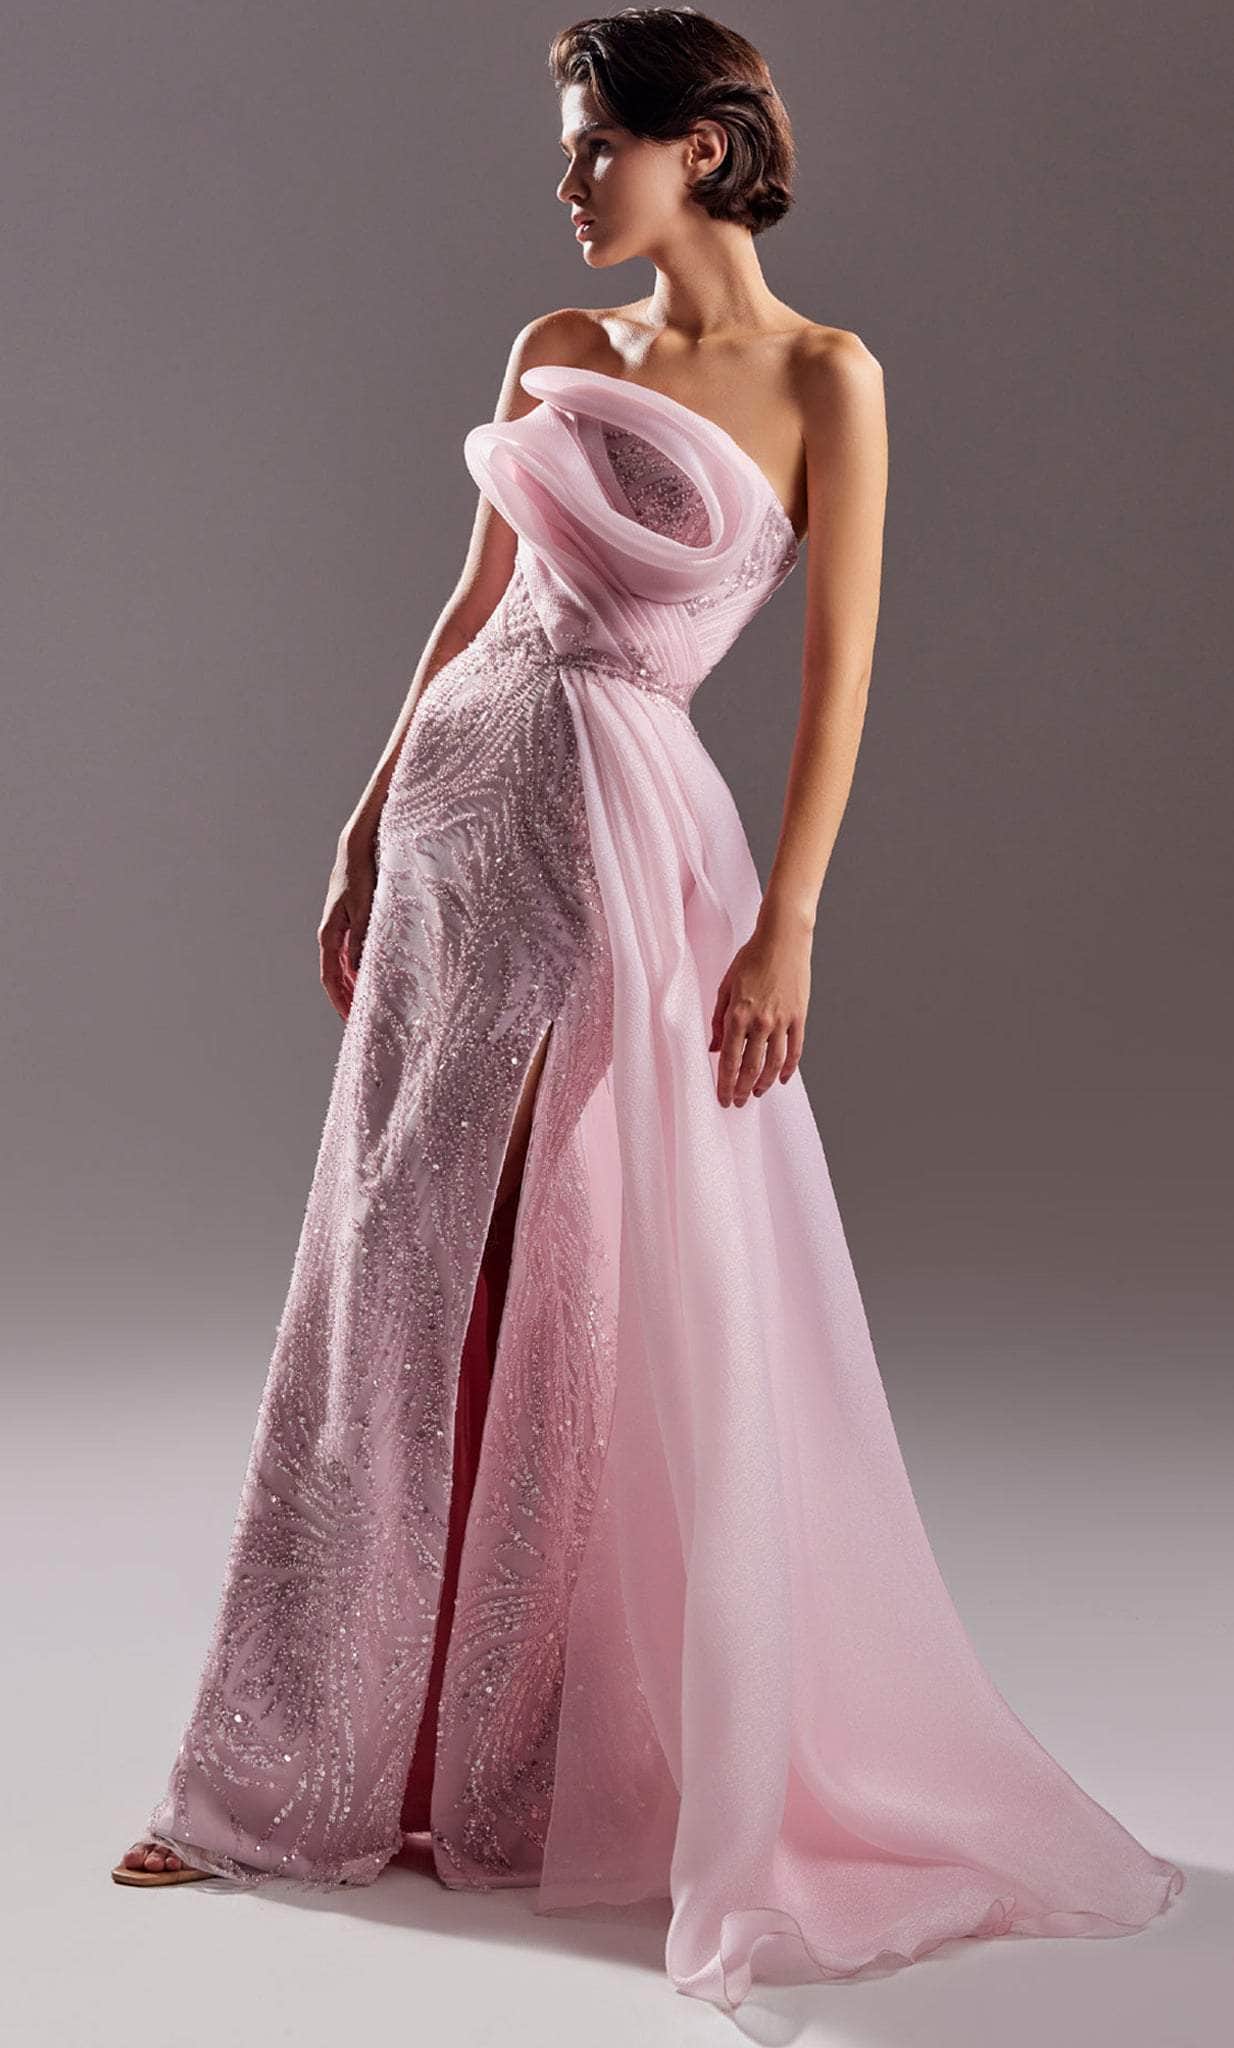 MNM COUTURE G1524 - Embellished Strapless Prom Gown Prom Dresses 0 / Pink